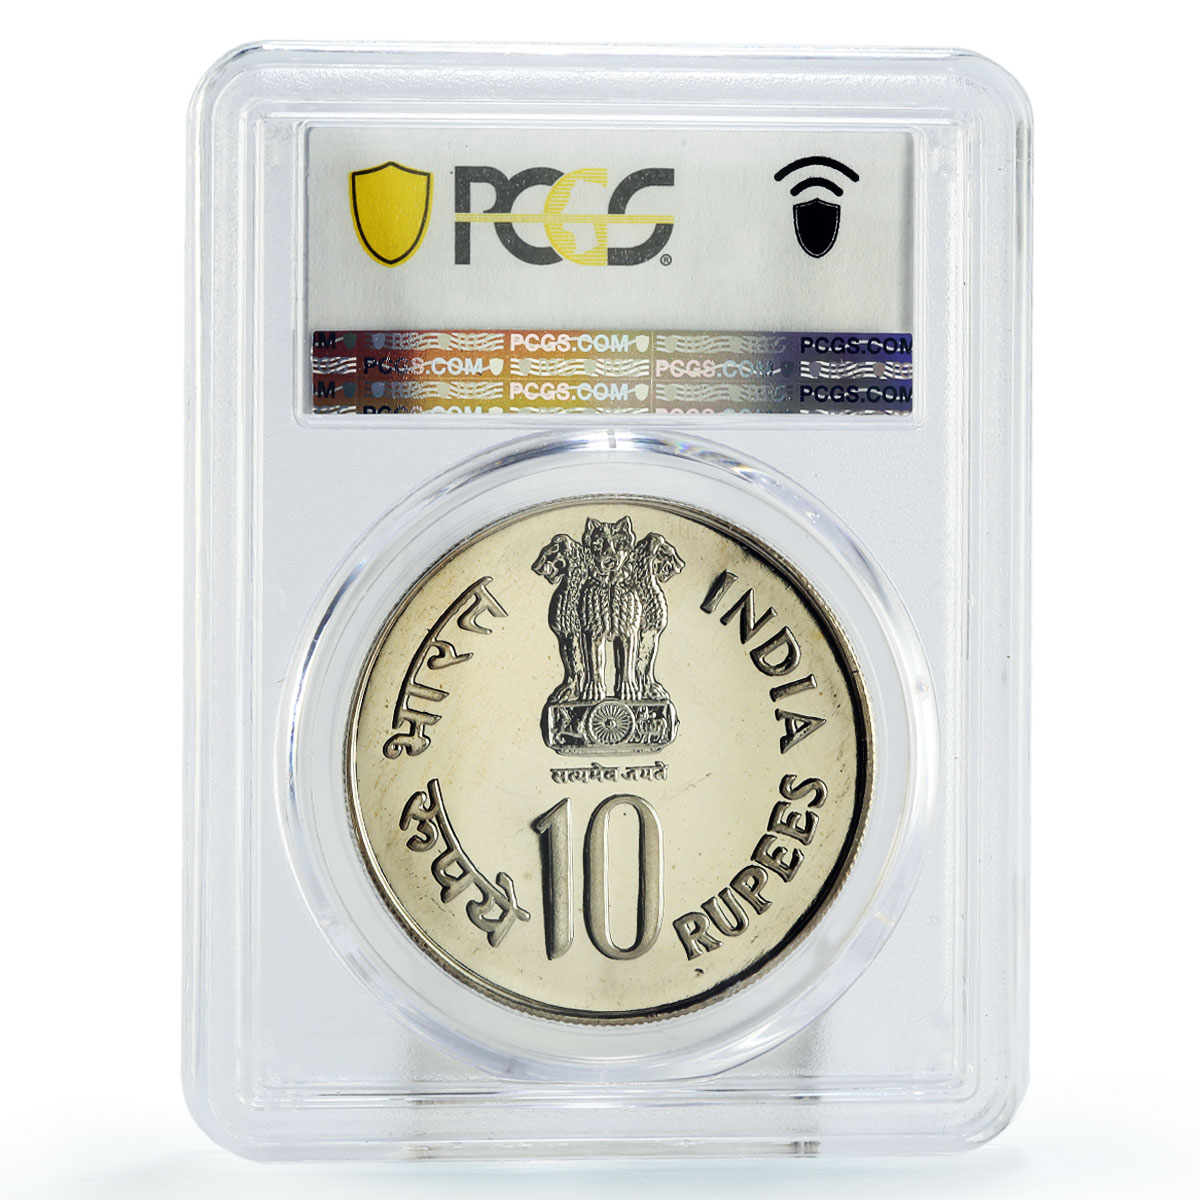 India 10 rupees UNESCO Save the Children Child Year PL63 PCGS CuNi coin 1979